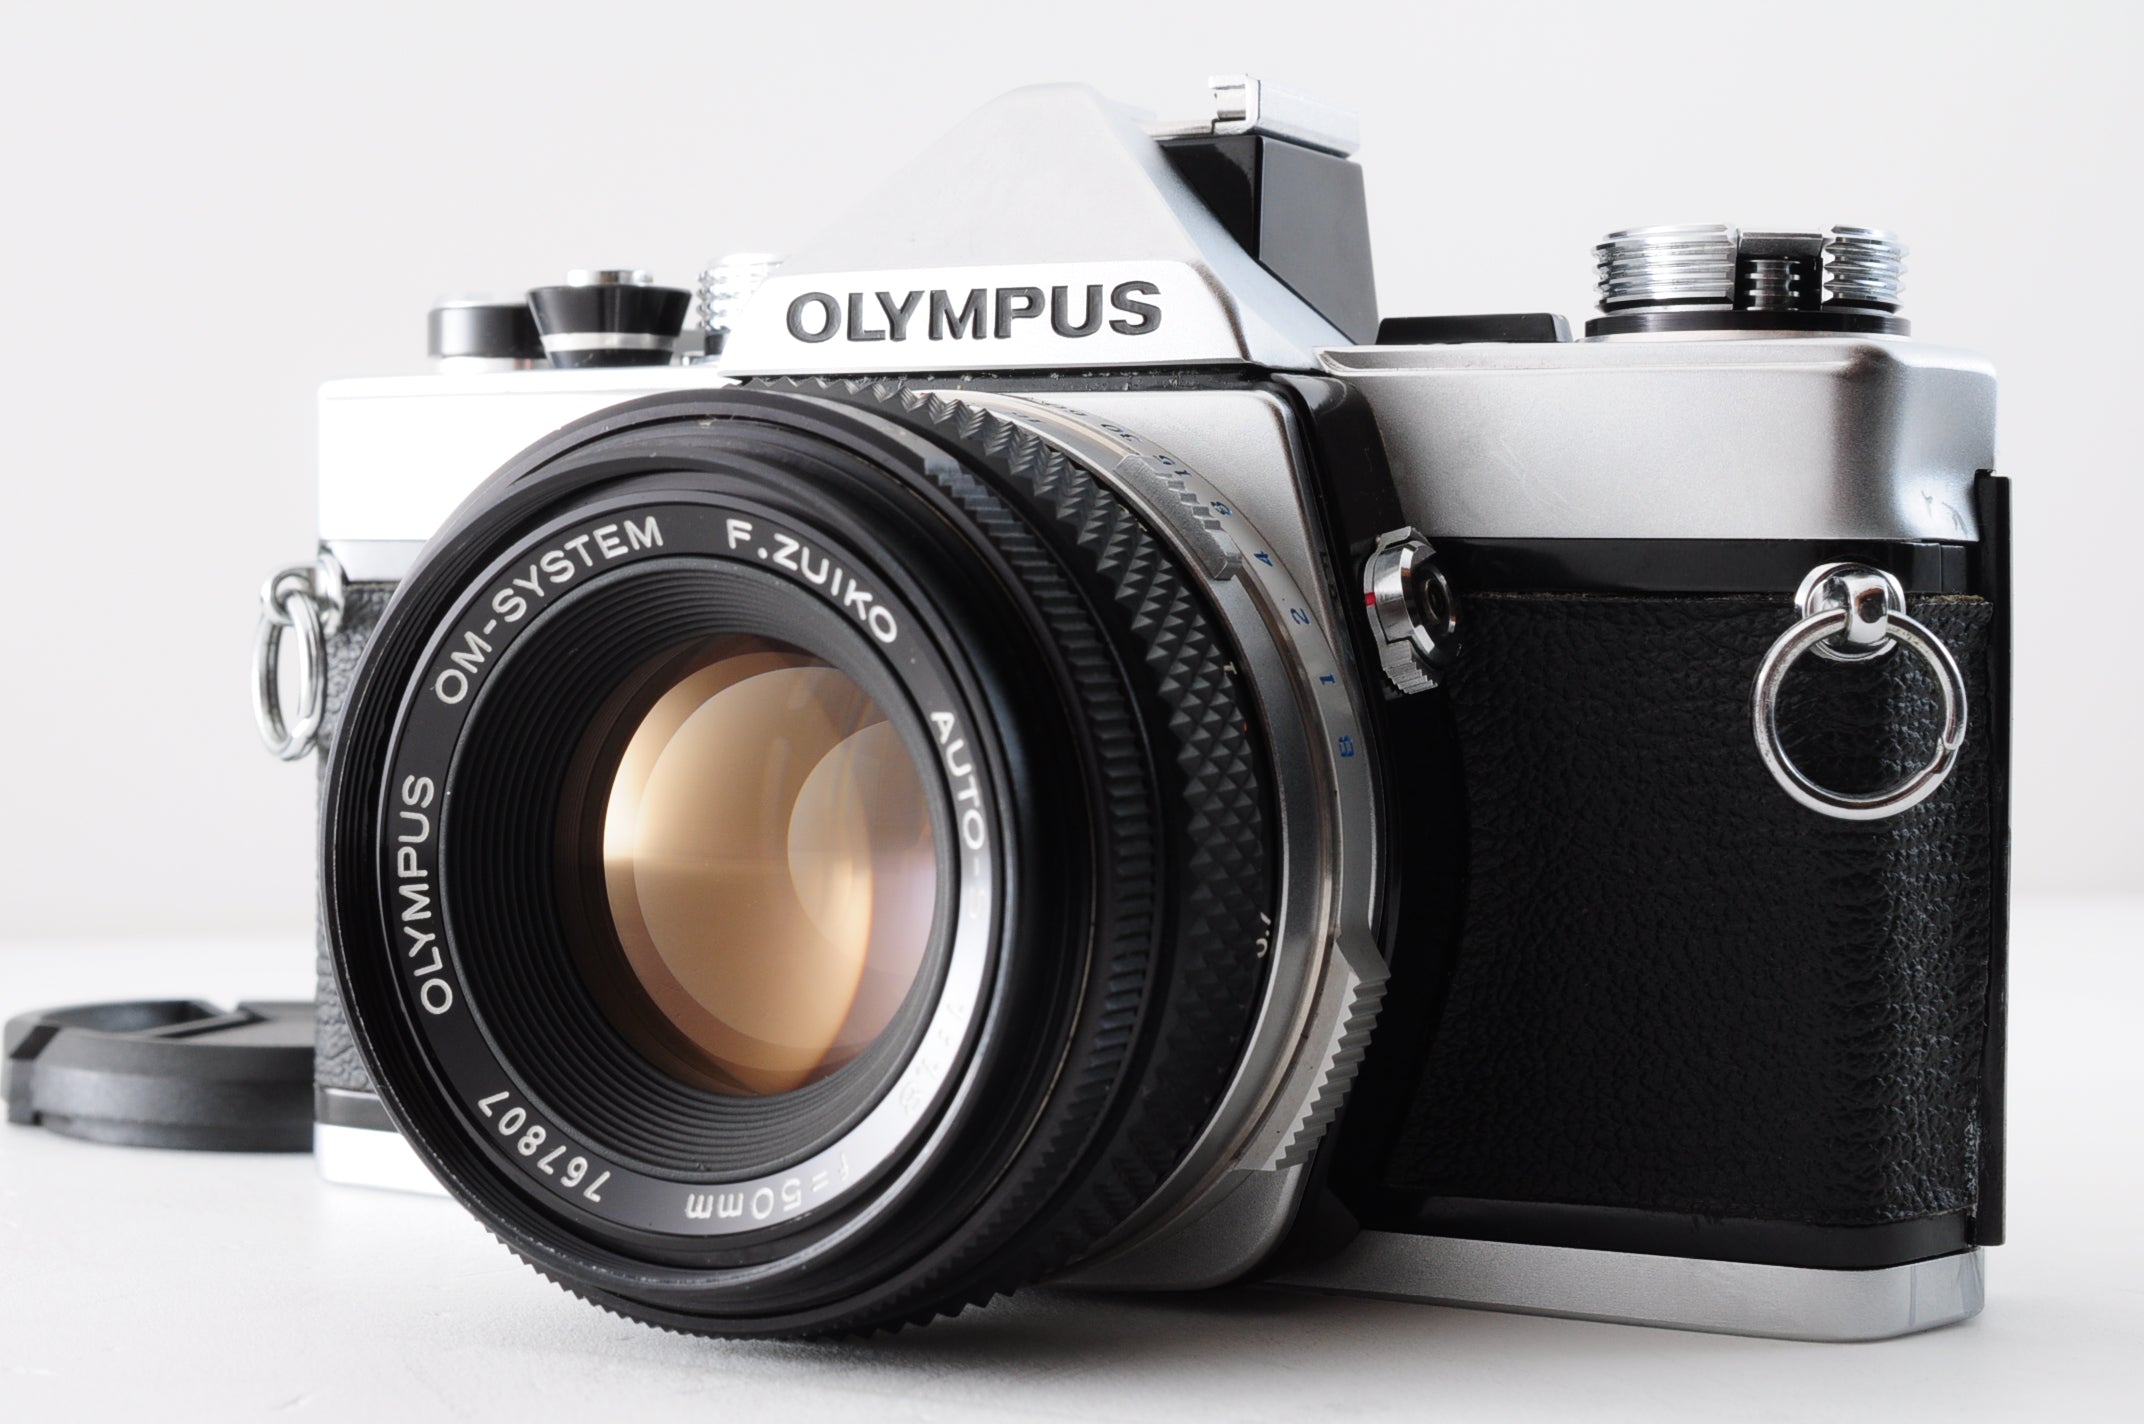 OLYMPUS – ALL FOR ONE CAMERA